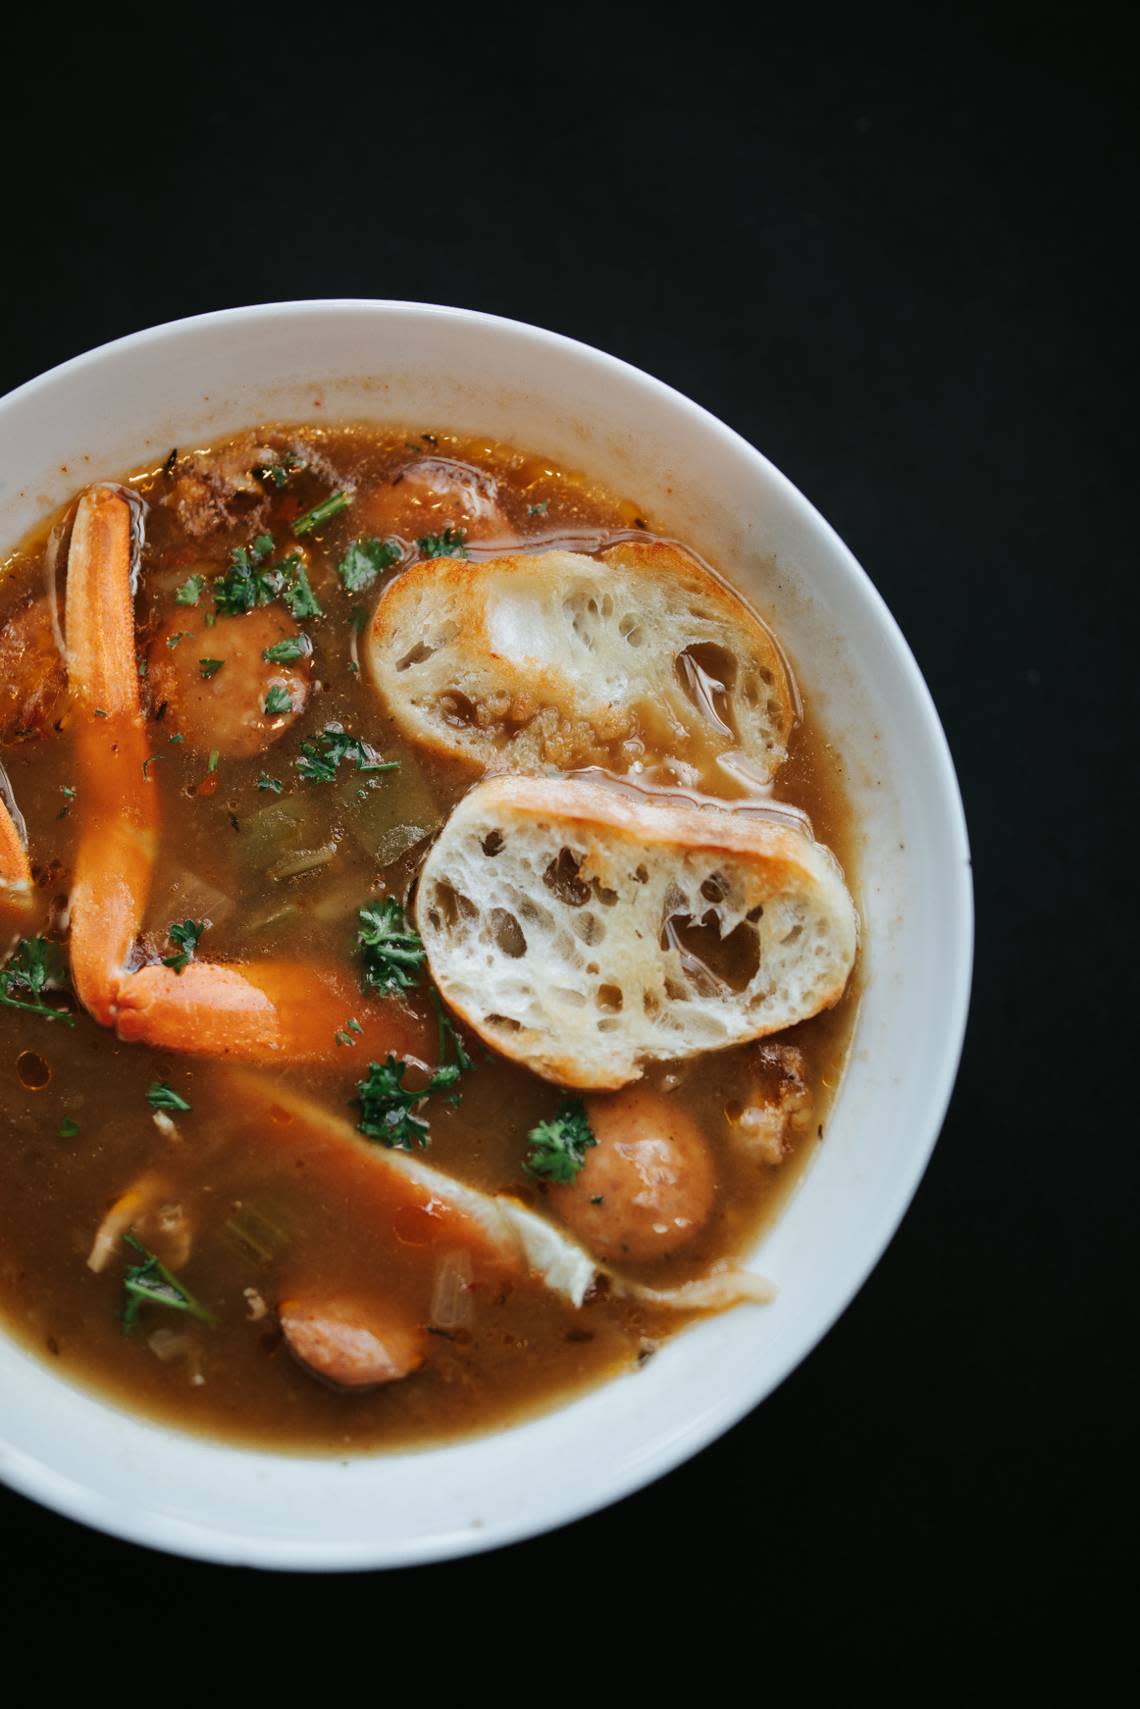 Creaux at 310 W. Short St. is closing June 30 after seven years. Creaux served New Orleans style favorites including seafood gumbo.